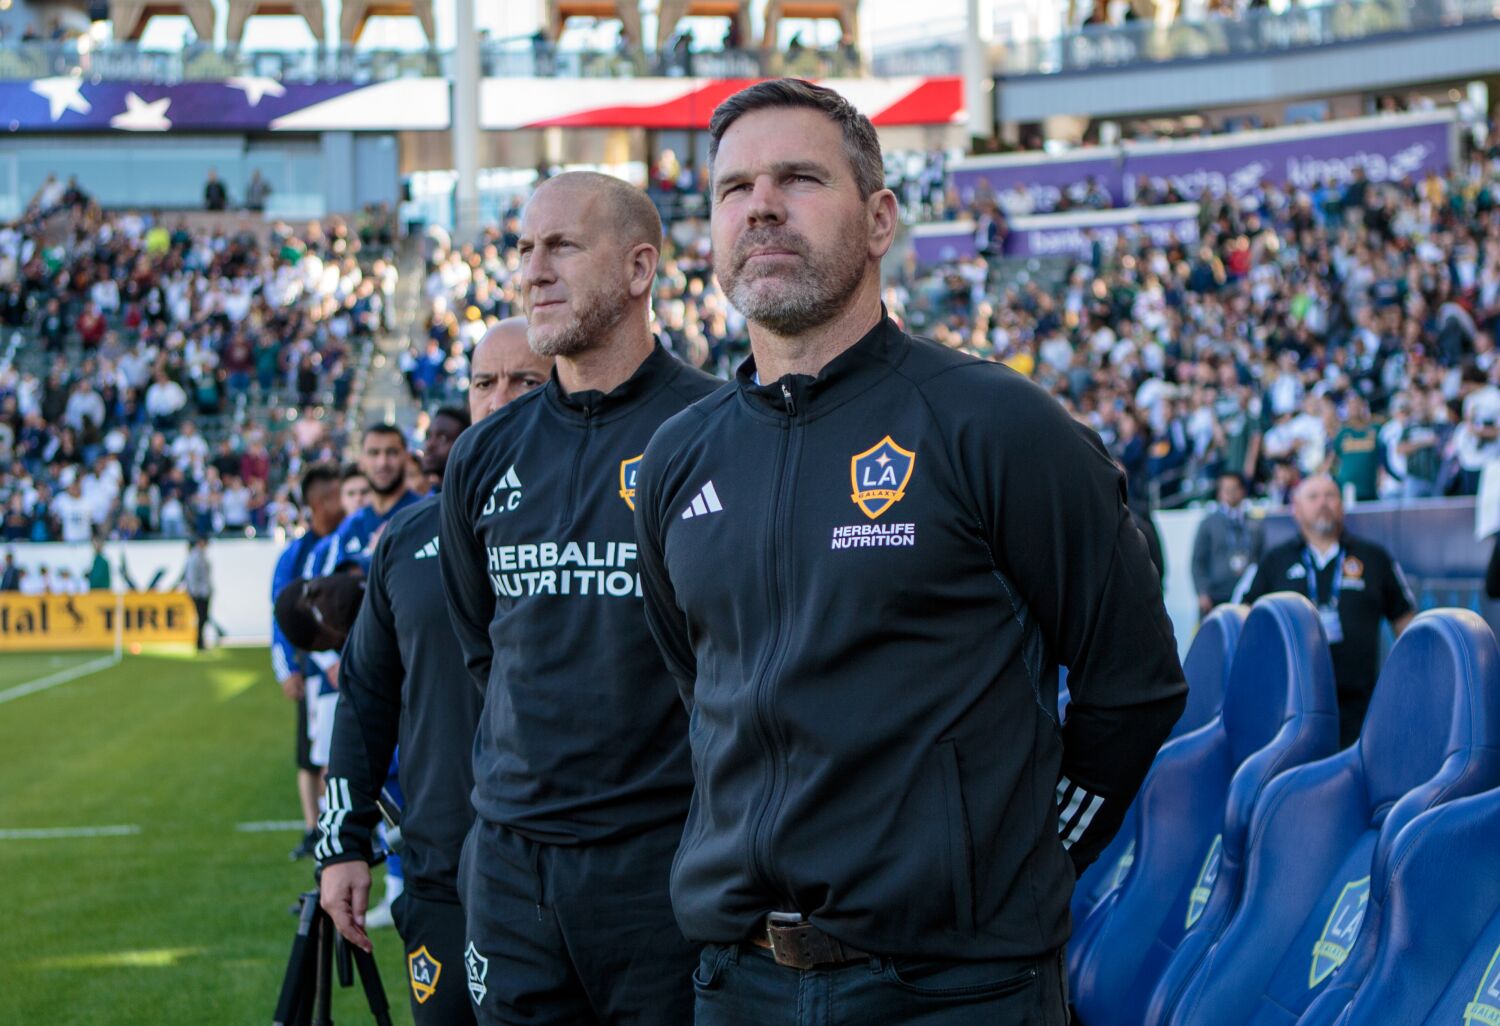 Commentary: Galaxy finally winning, but boycotts and fallout from cheating scandal remain issues